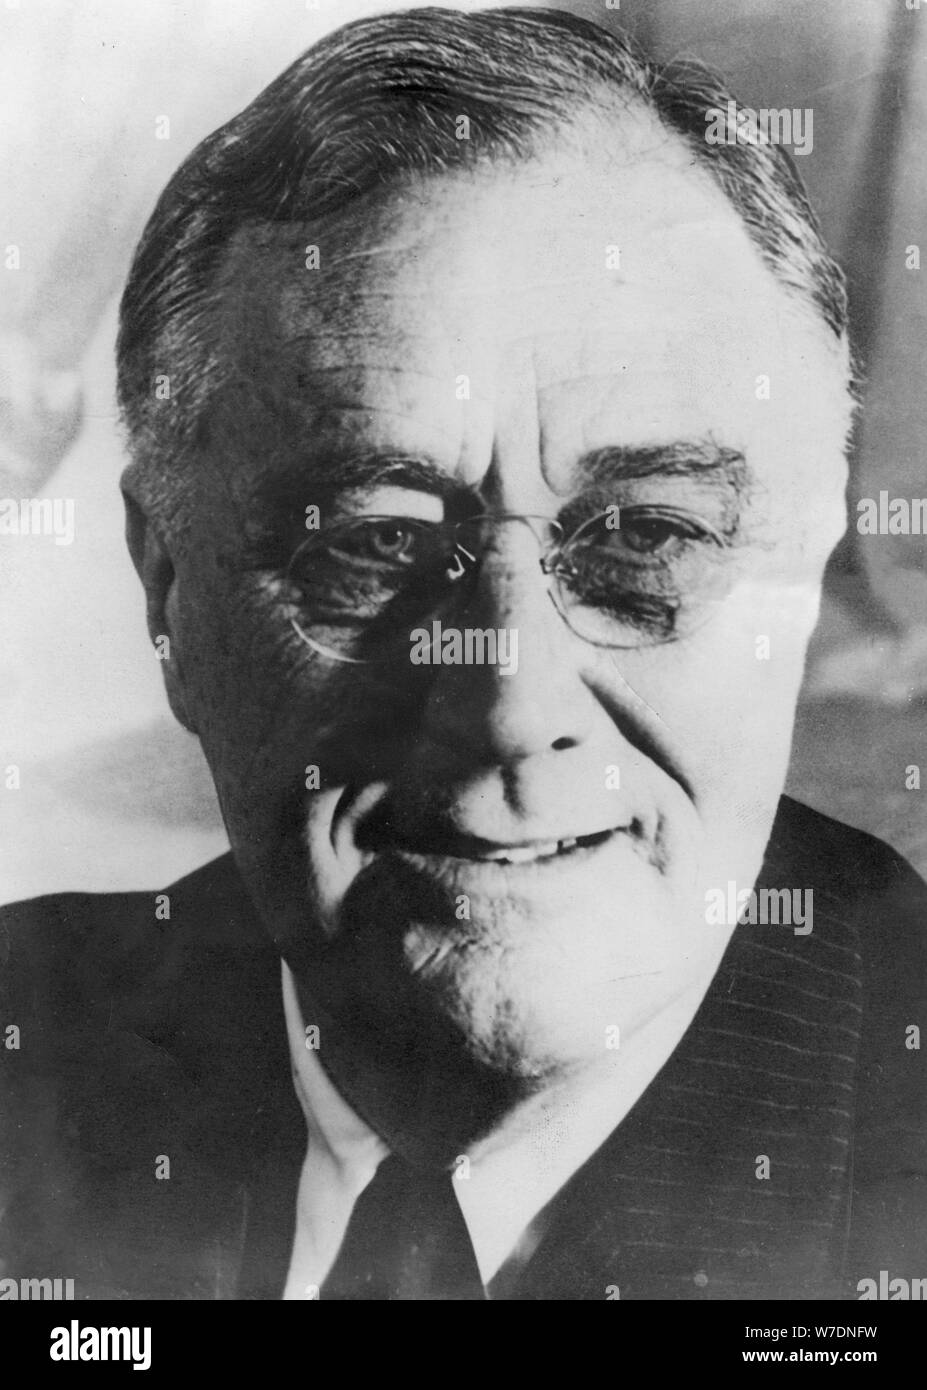 Franklin Delano Roosevelt (1882-1945), thirty-second president of the United States, c1940s. Artist: Unknown Stock Photo